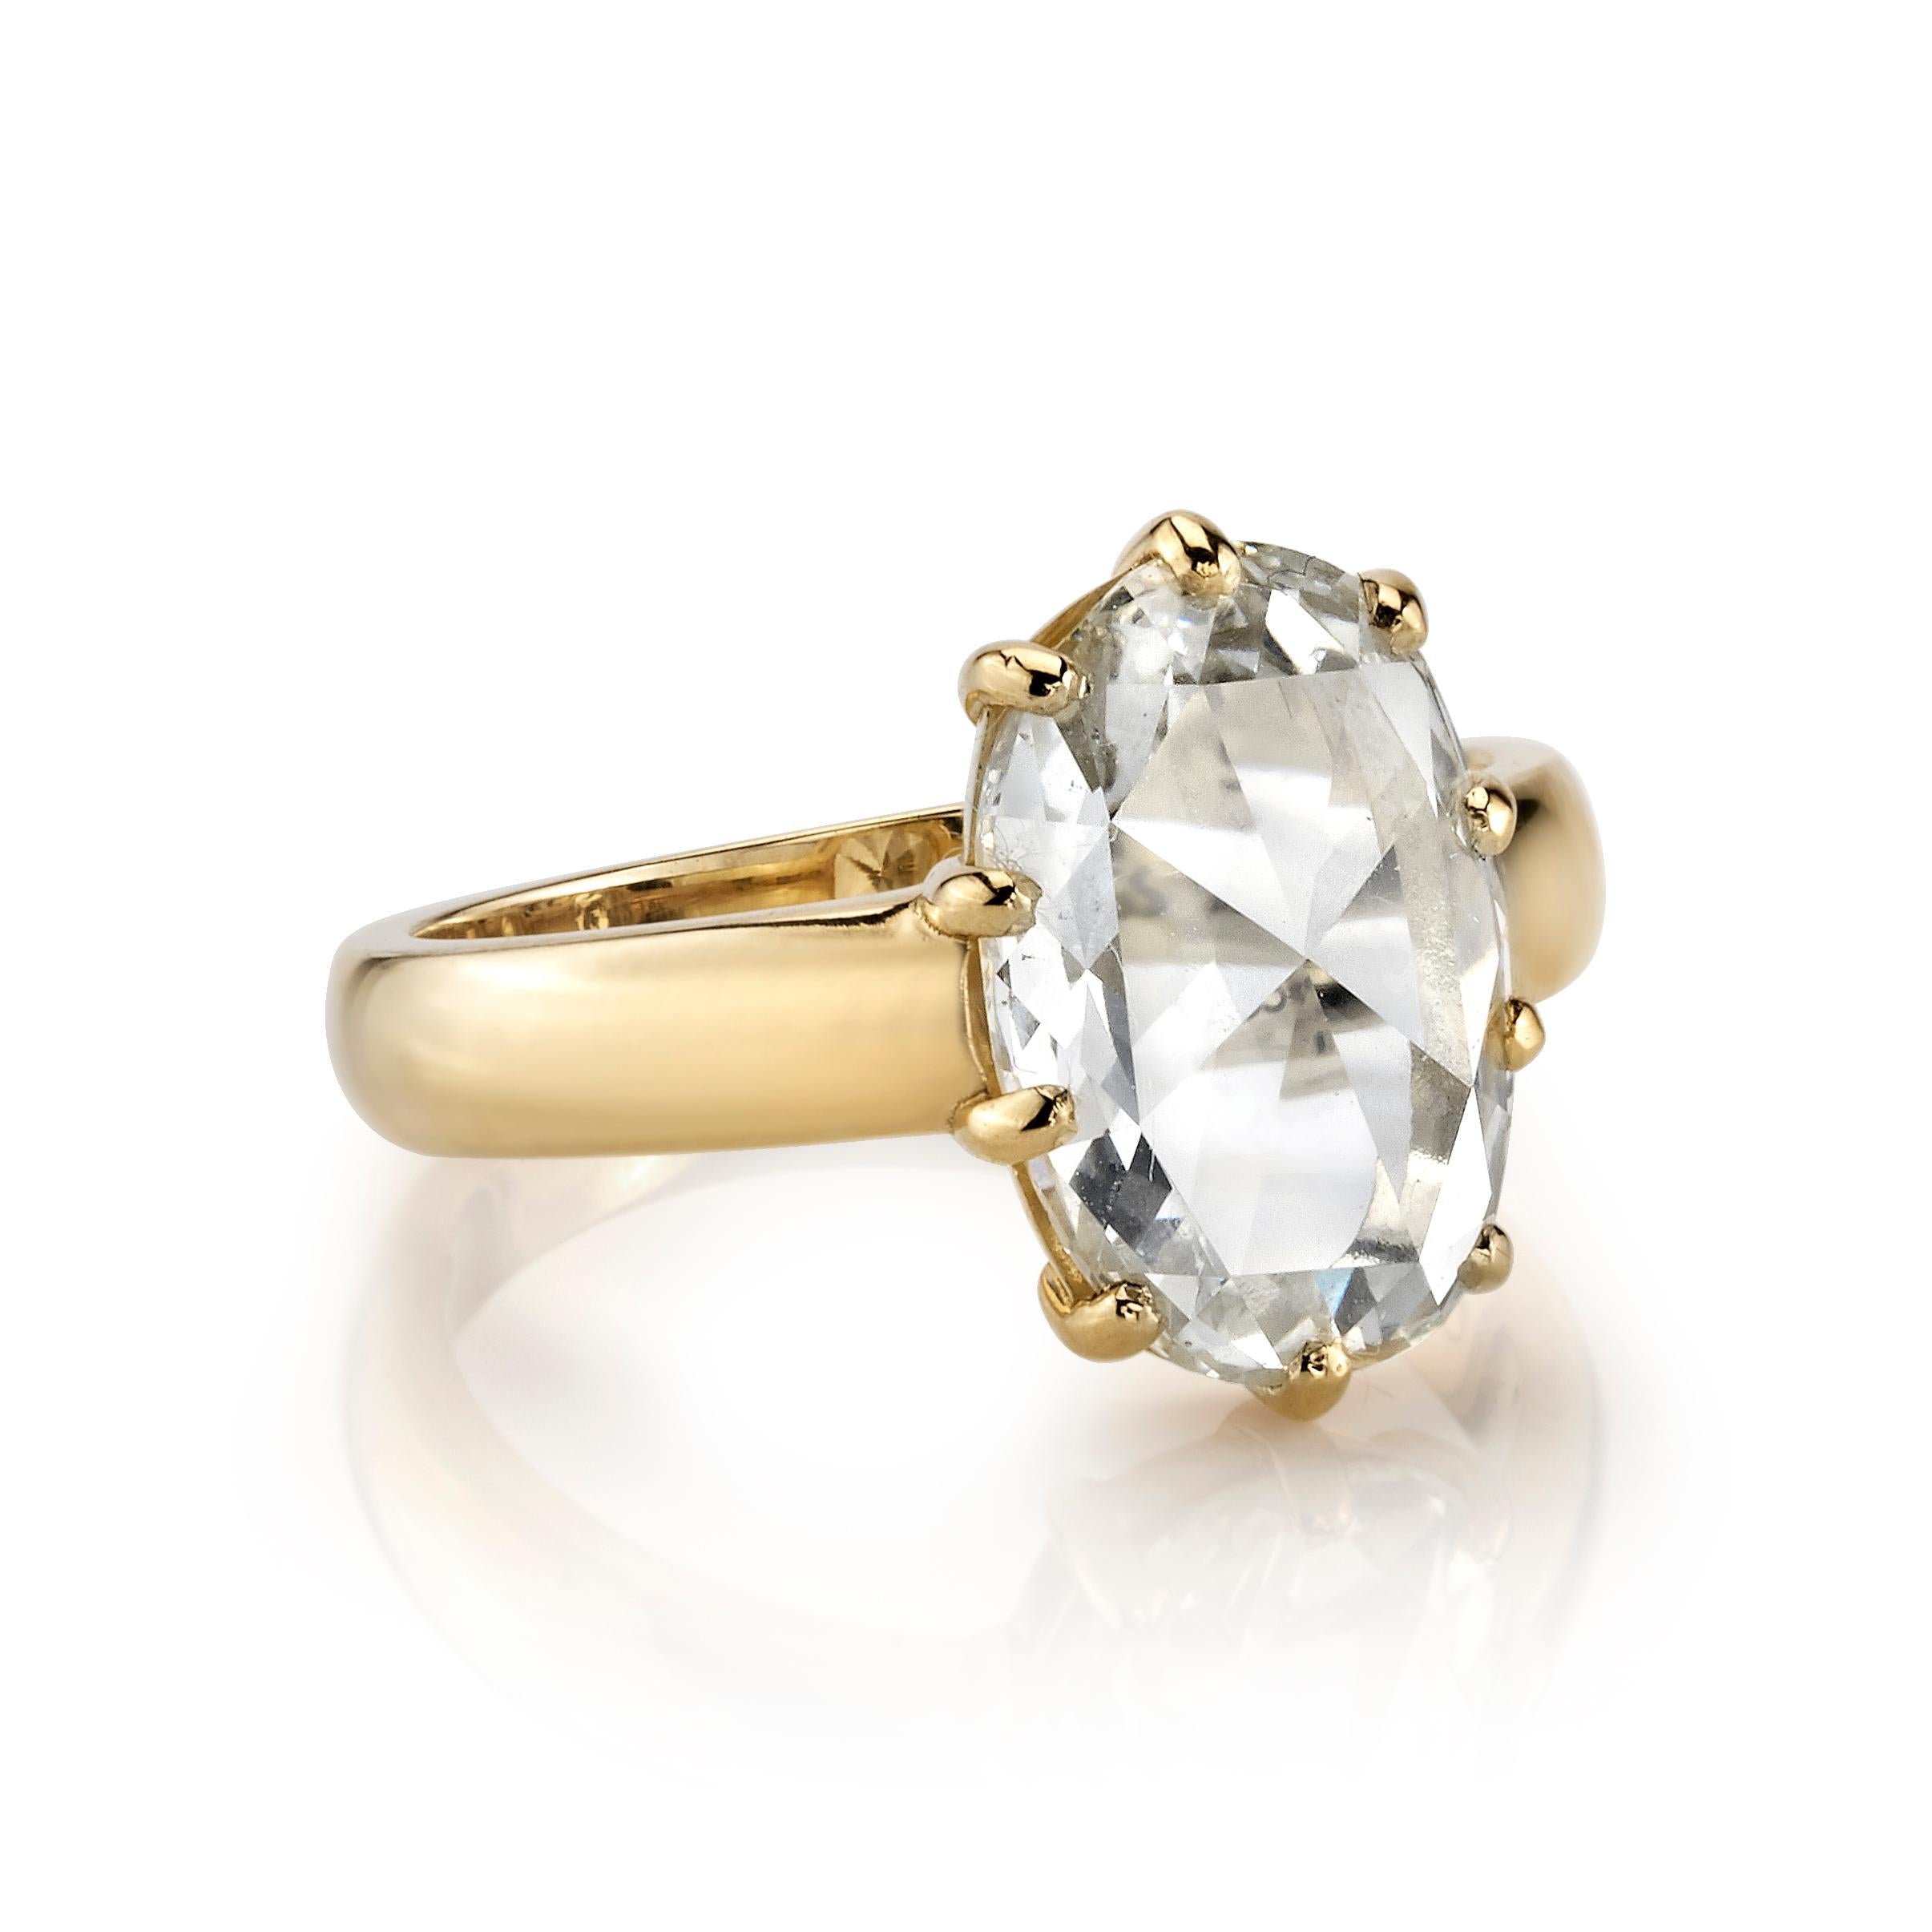 2.75ctw L/VS2 GIA certified oval Rose cut diamond set in a handcrafted 18K yellow gold mounting. 

Ring is currently a size 6 and can be sized to fit.

Our jewelry is made locally in Los Angeles and most pieces are made to order. For these